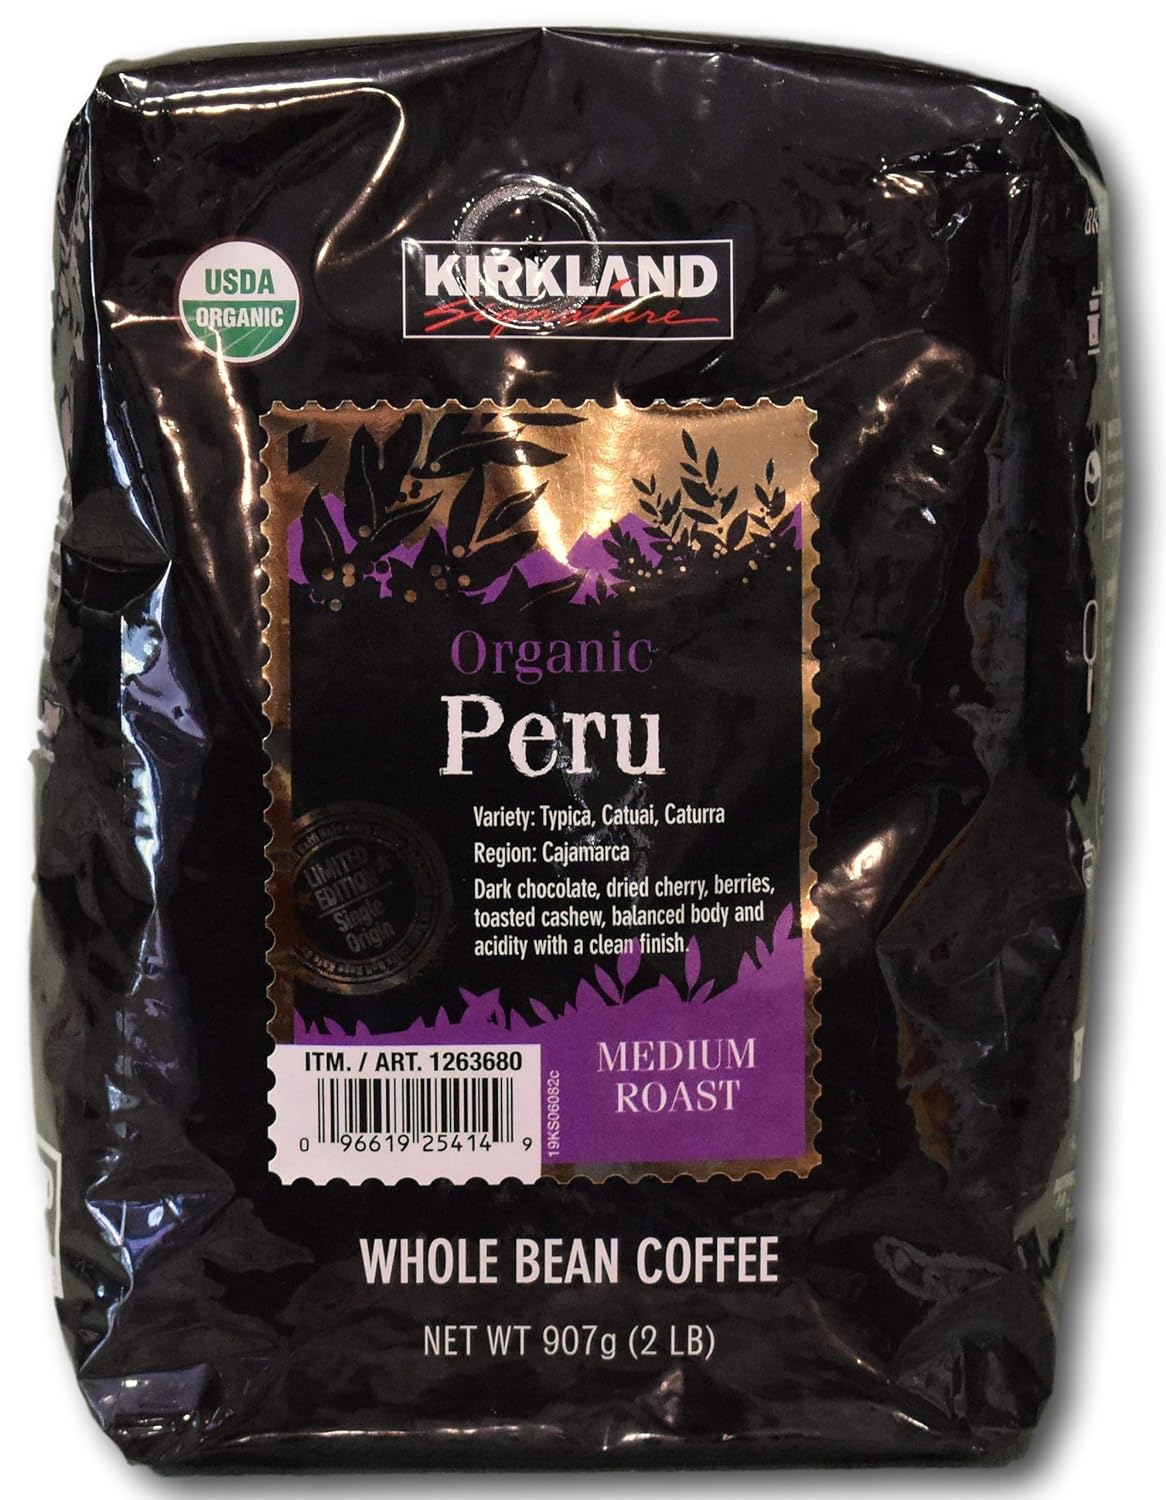 Good coffee. I like my coffee strong and this is a medium roast but I just put an extra scoop in and its perfect. While it may not be earth shattering, it is good